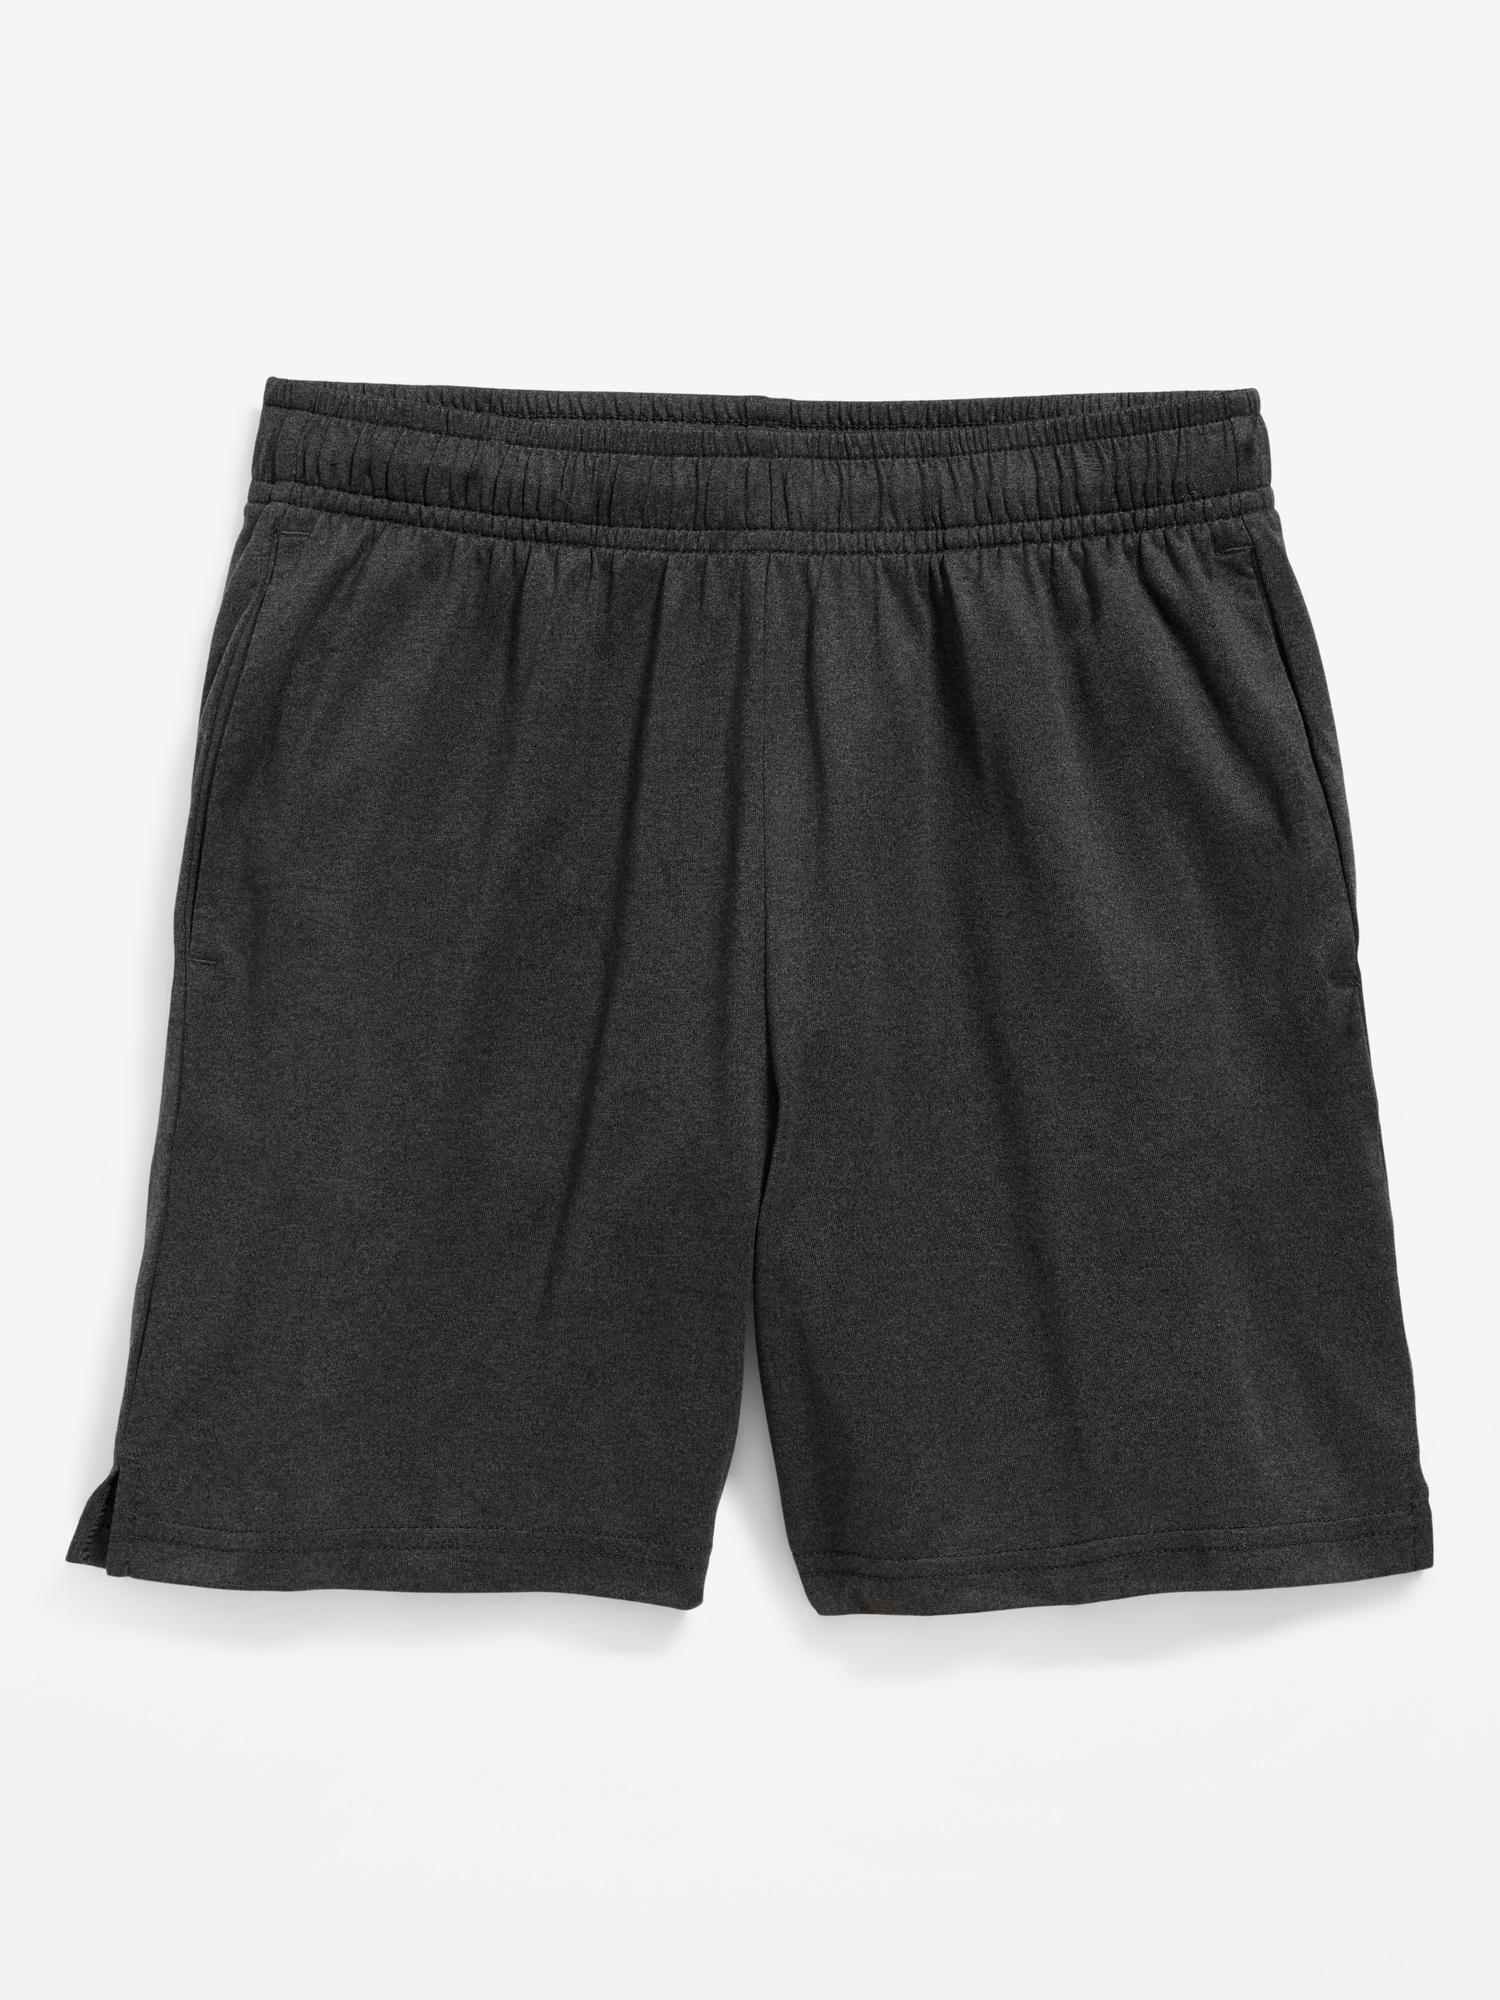 Old Navy Cloud 94 Soft Go-Dry Cool Performance Shorts for Boys (Above Knee) black. 1